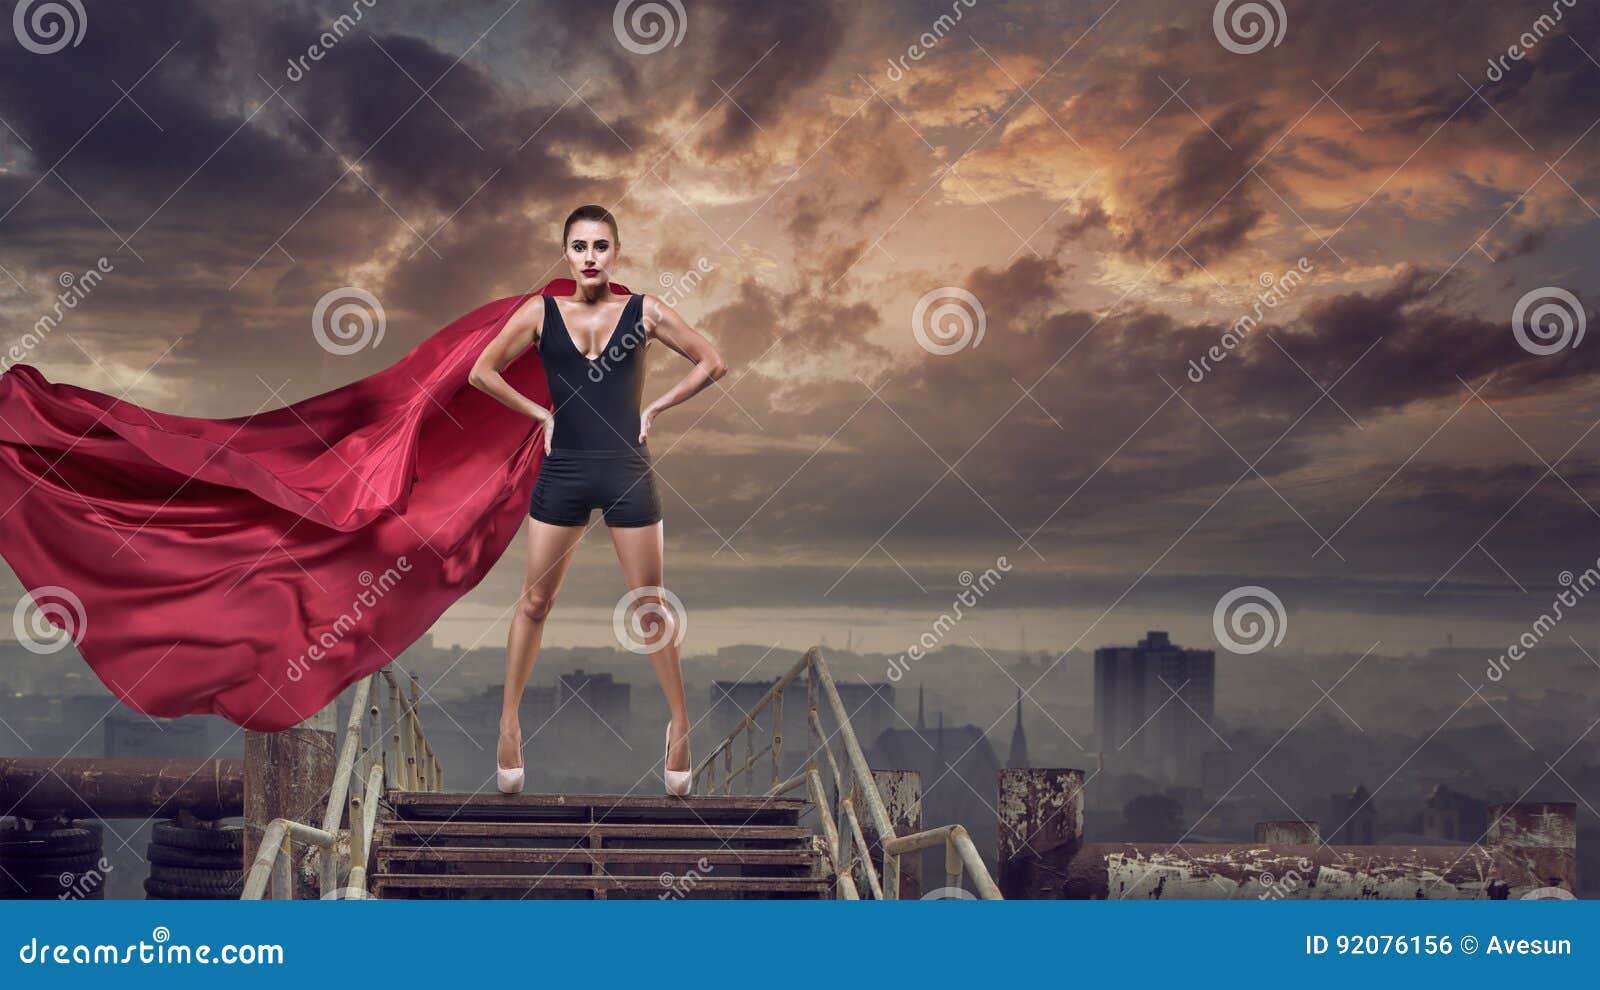 super woman with red cape